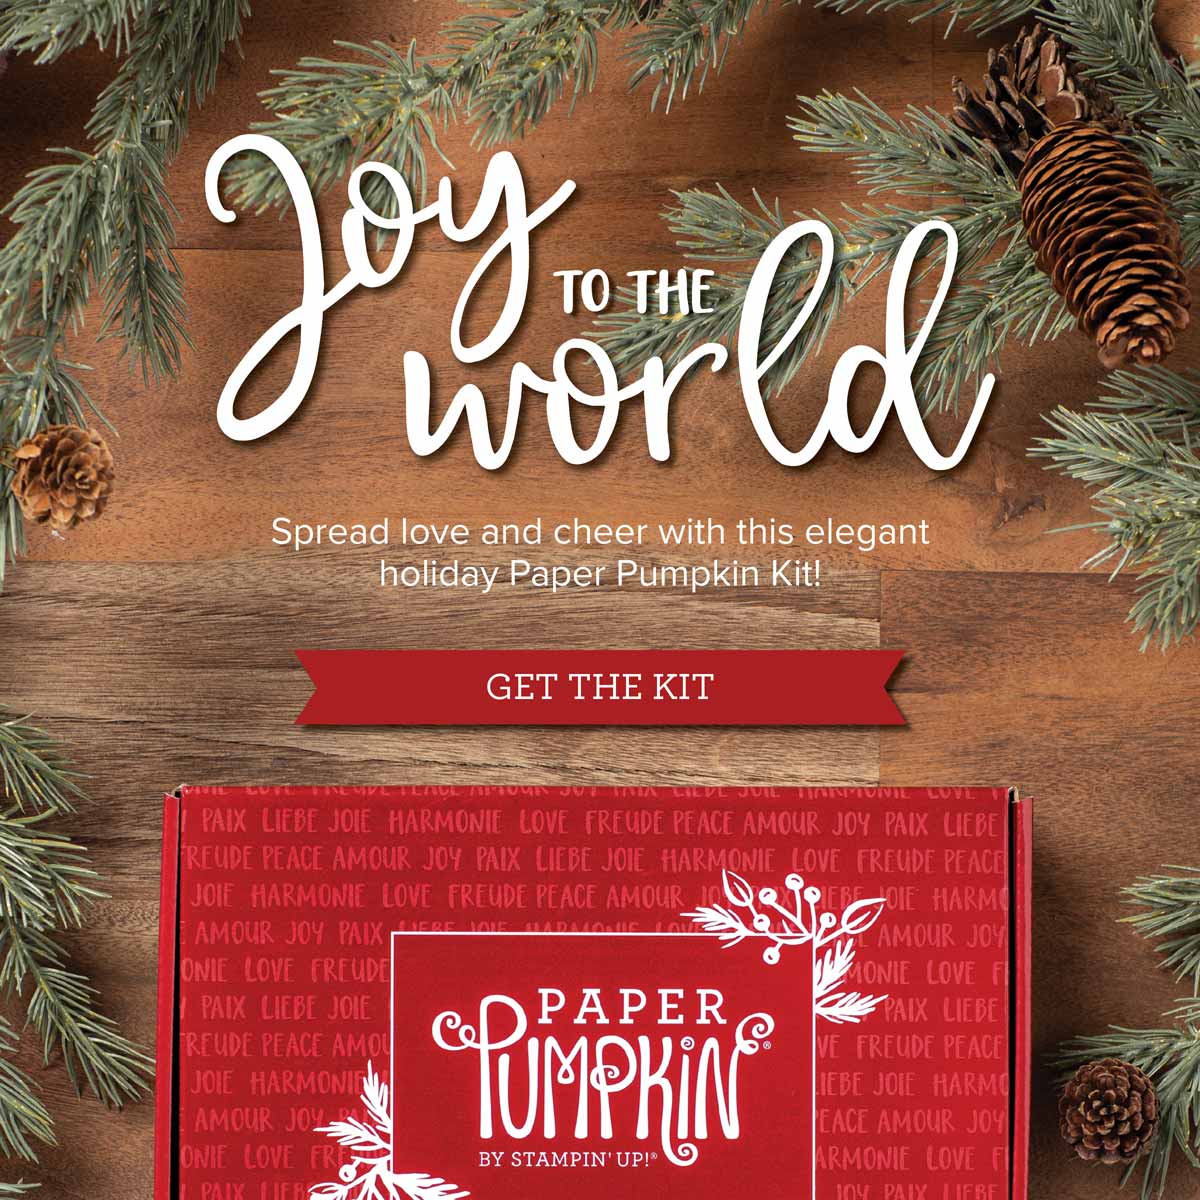 Joy to the World is the Paper Pumpkin kit for October spread some joy with this fun card kit. Details are on my blog here: https://wp.me/p59VWq-buy